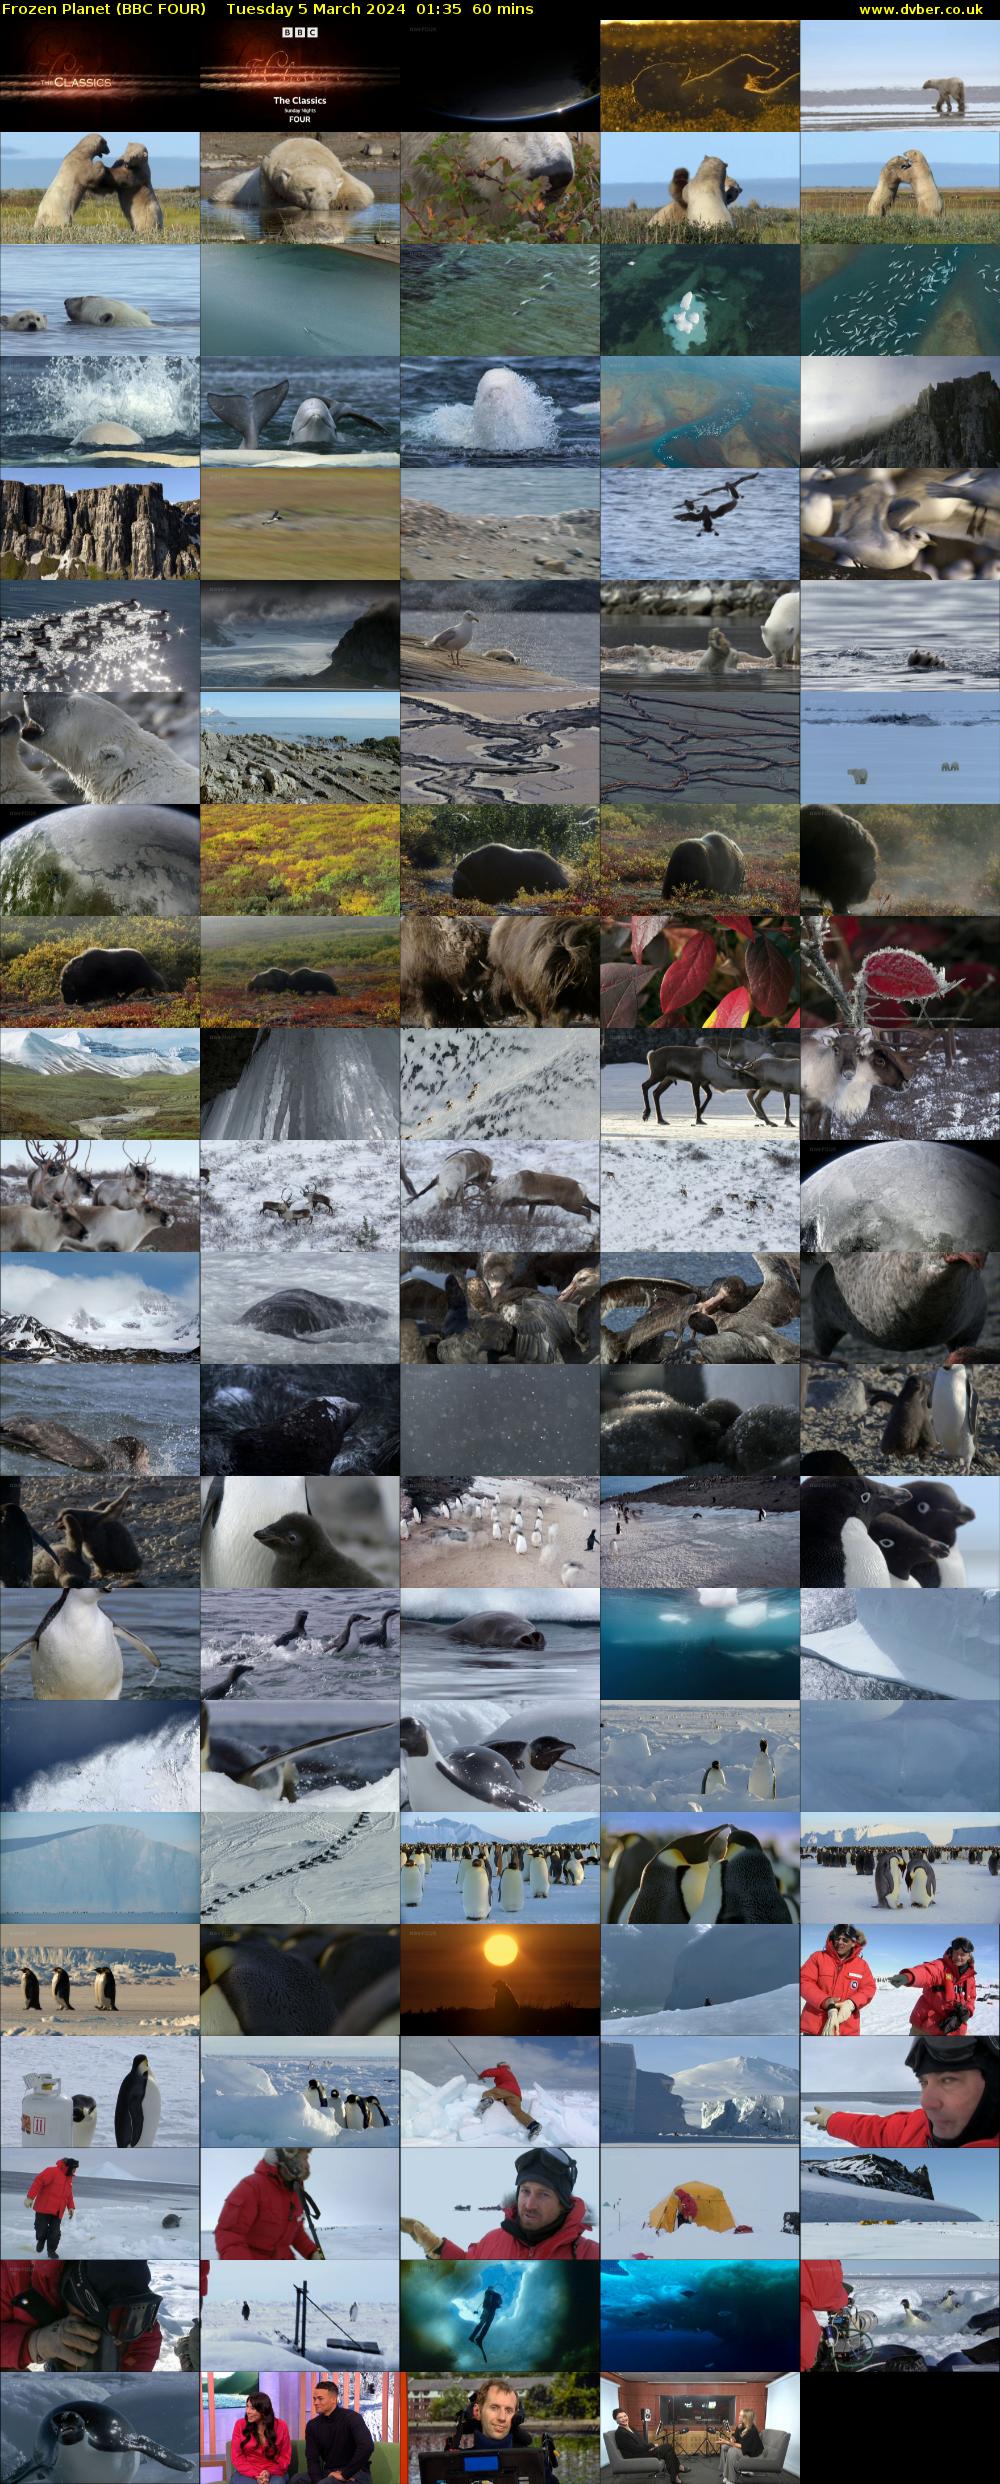 Frozen Planet (BBC FOUR) Tuesday 5 March 2024 01:35 - 02:35